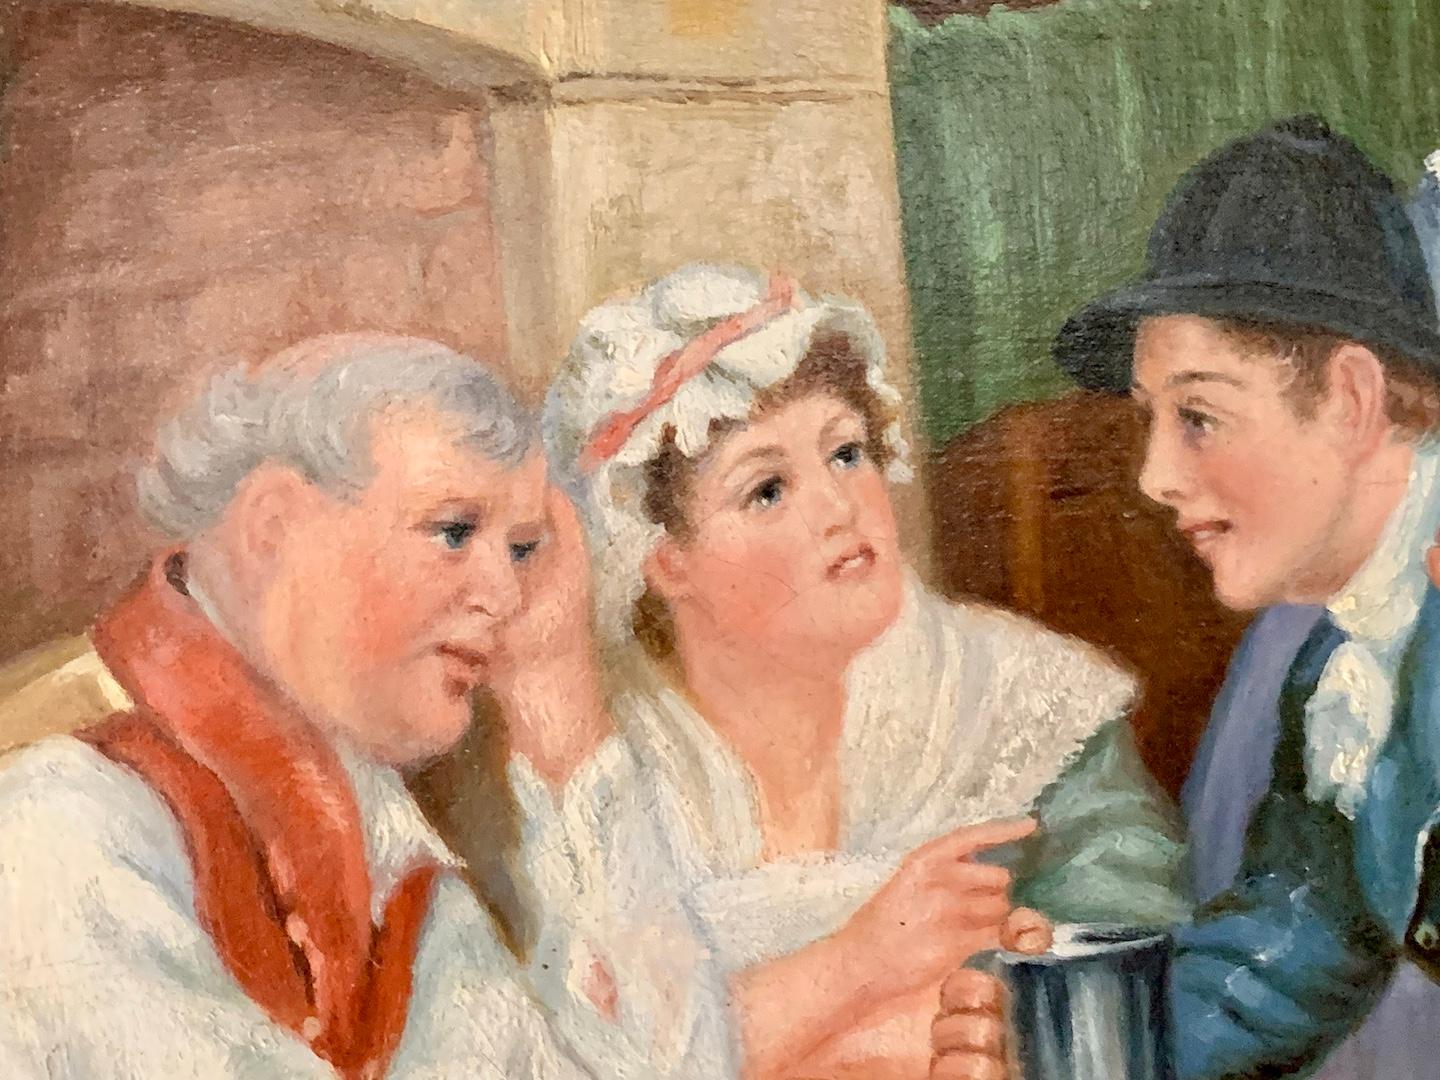 Attributed to Randolph Caldecott, a well-known English painter, and illustrator of English Pub interior scenes. 

The scene is great fun, as we can see different groups all enjoying the Classic English Pub interior. 

The artist was known in the